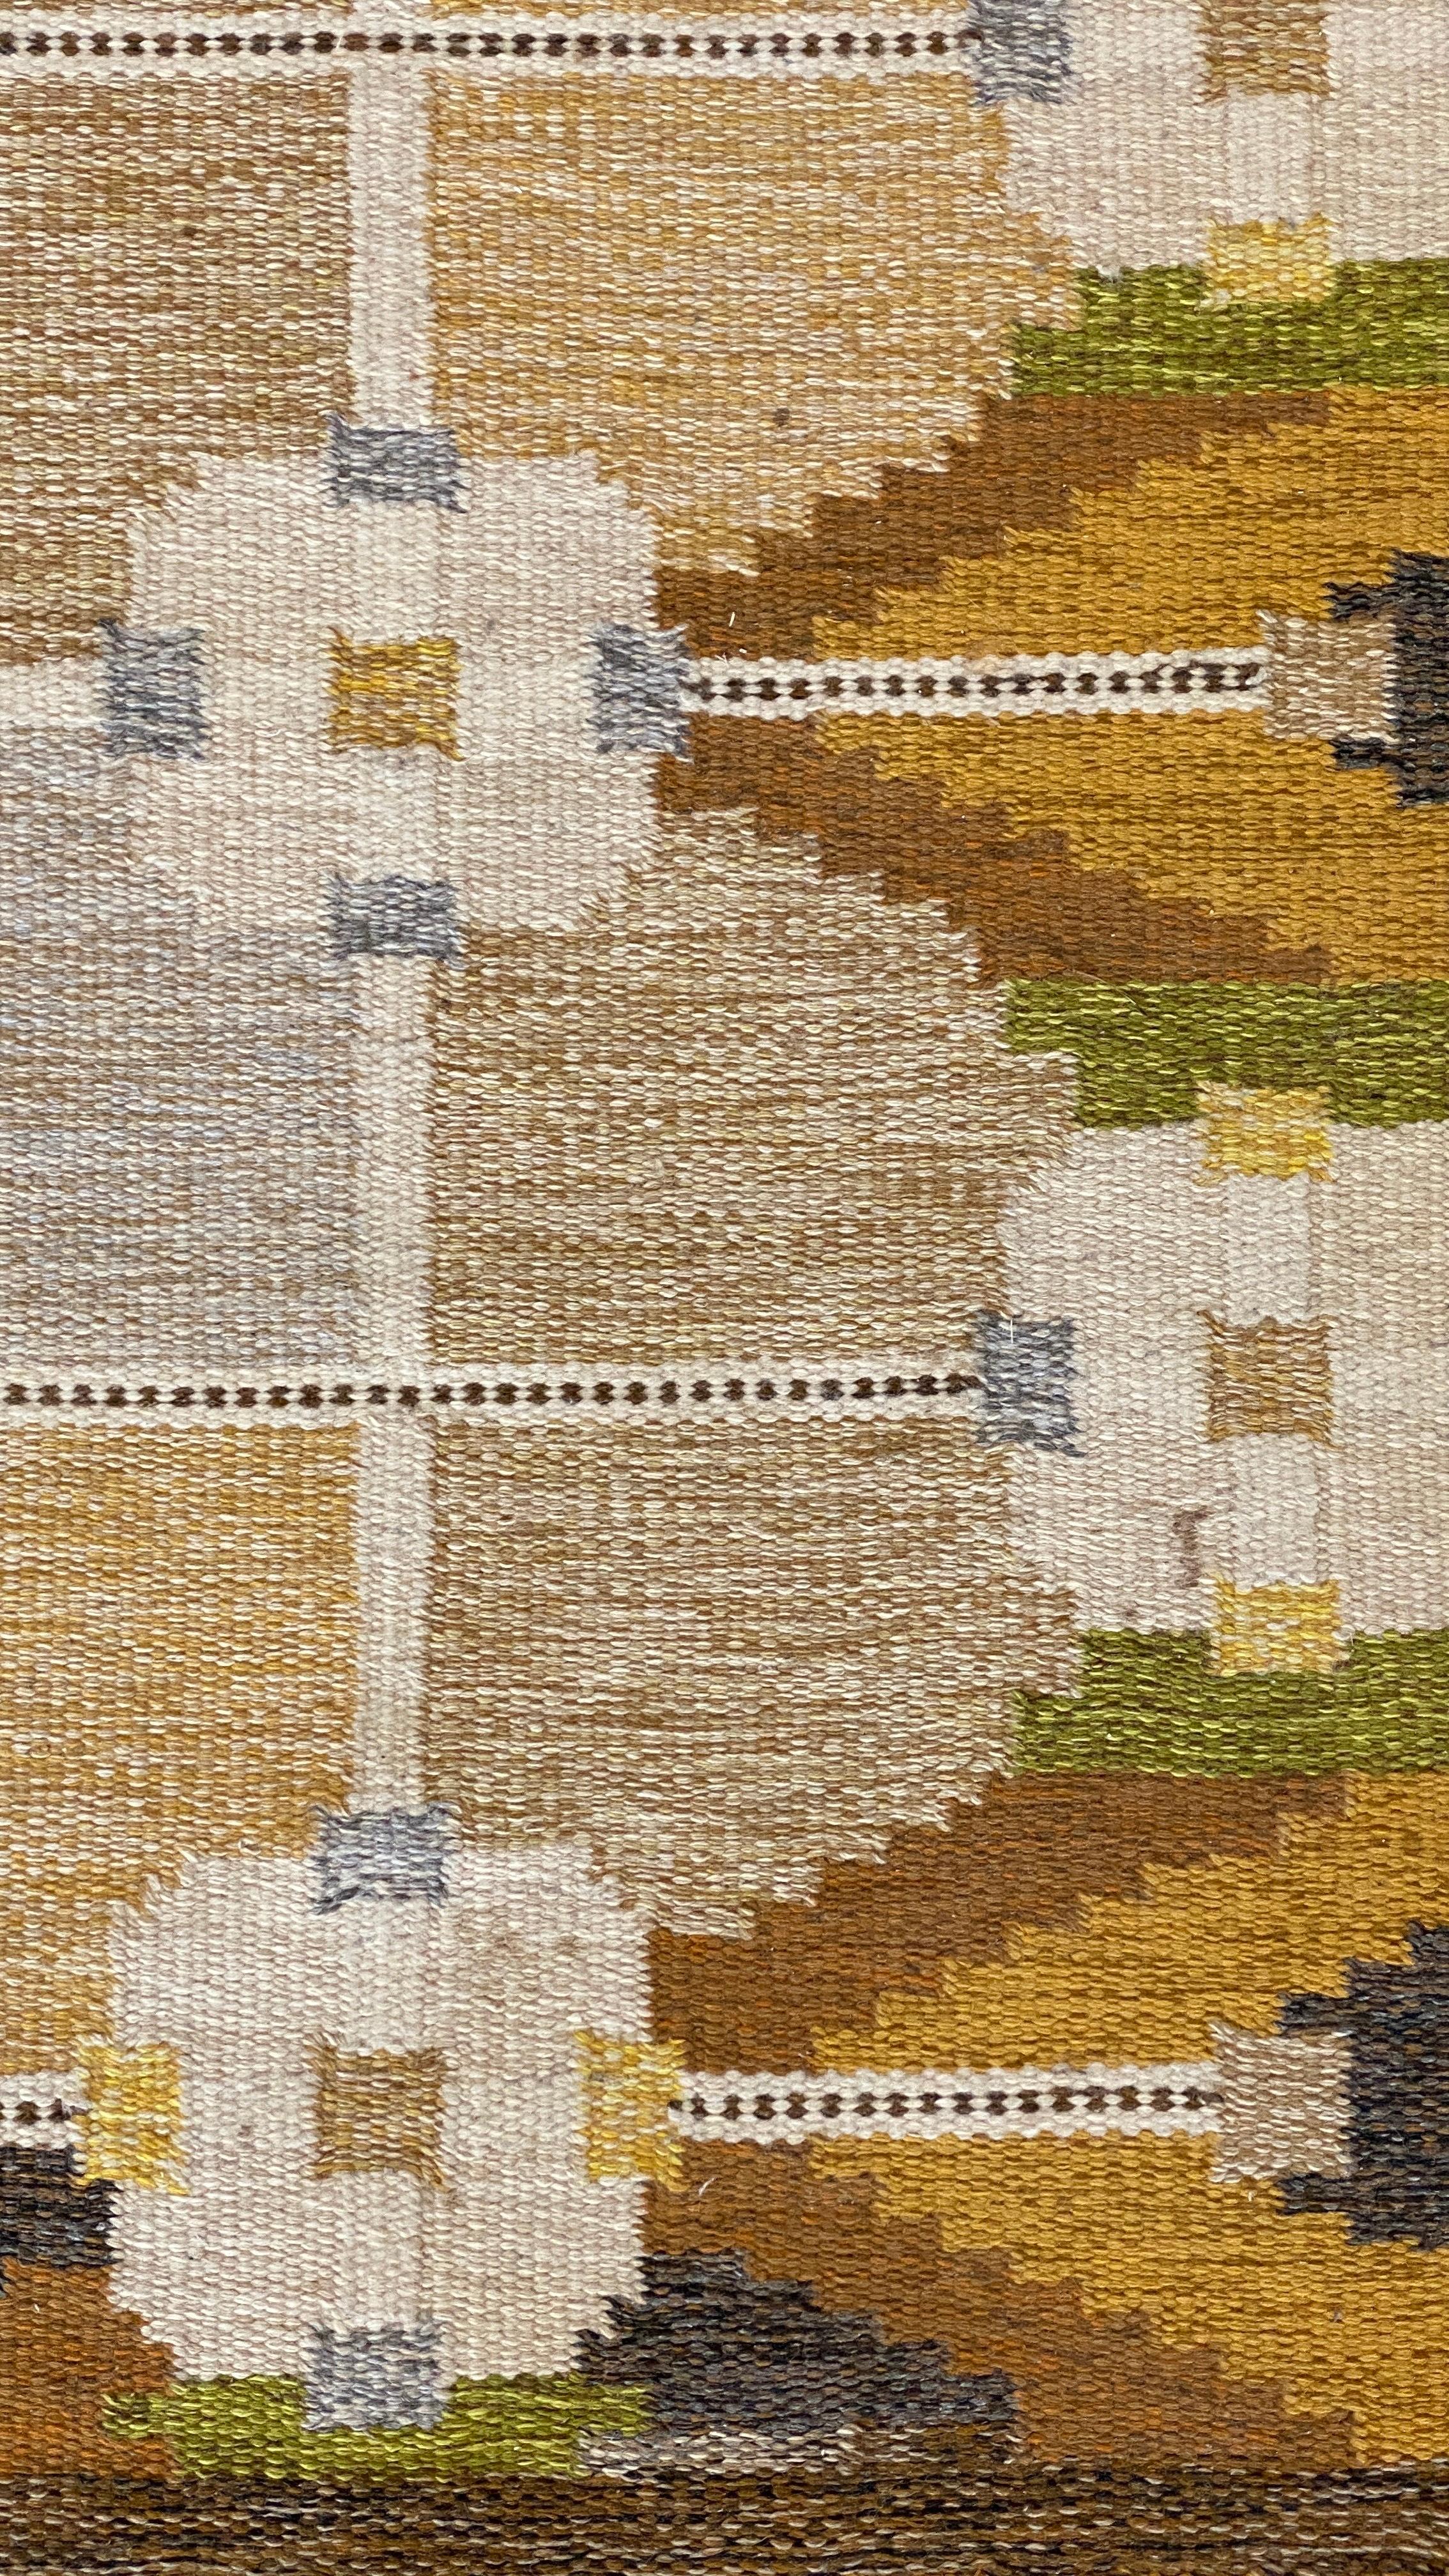 A handwoven modernist flat-weave carpet / rug by Ingegerd Silow. Most likely woven in the 1950s. Handwoven in wool, using a Kilim technique. Signed

Follows a lineage of Modernist rugs produced in Sweden throughout the 20th century. Other artists